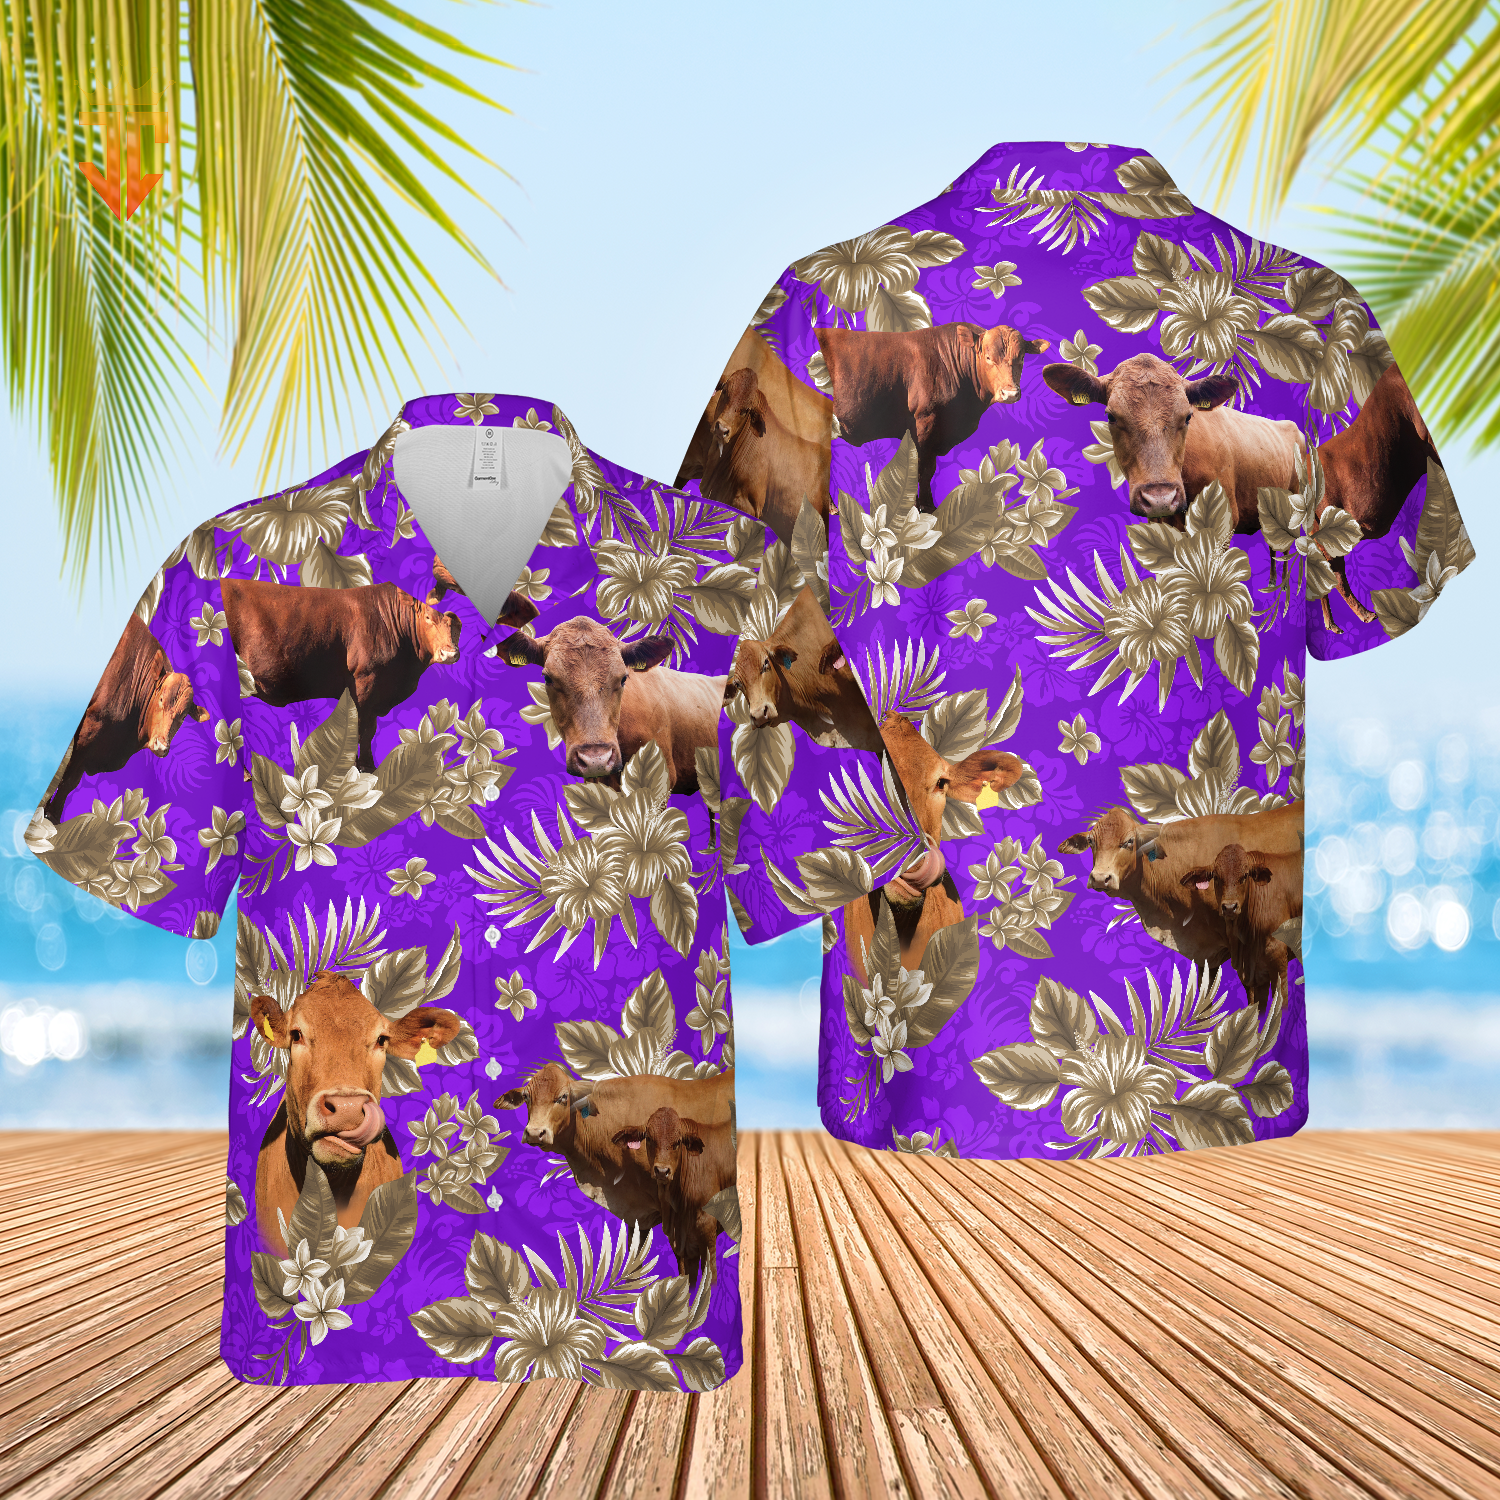 Red Angus Cattle Lovers Aloha Pattern All Over Printed 3D Hawaiian Shirt